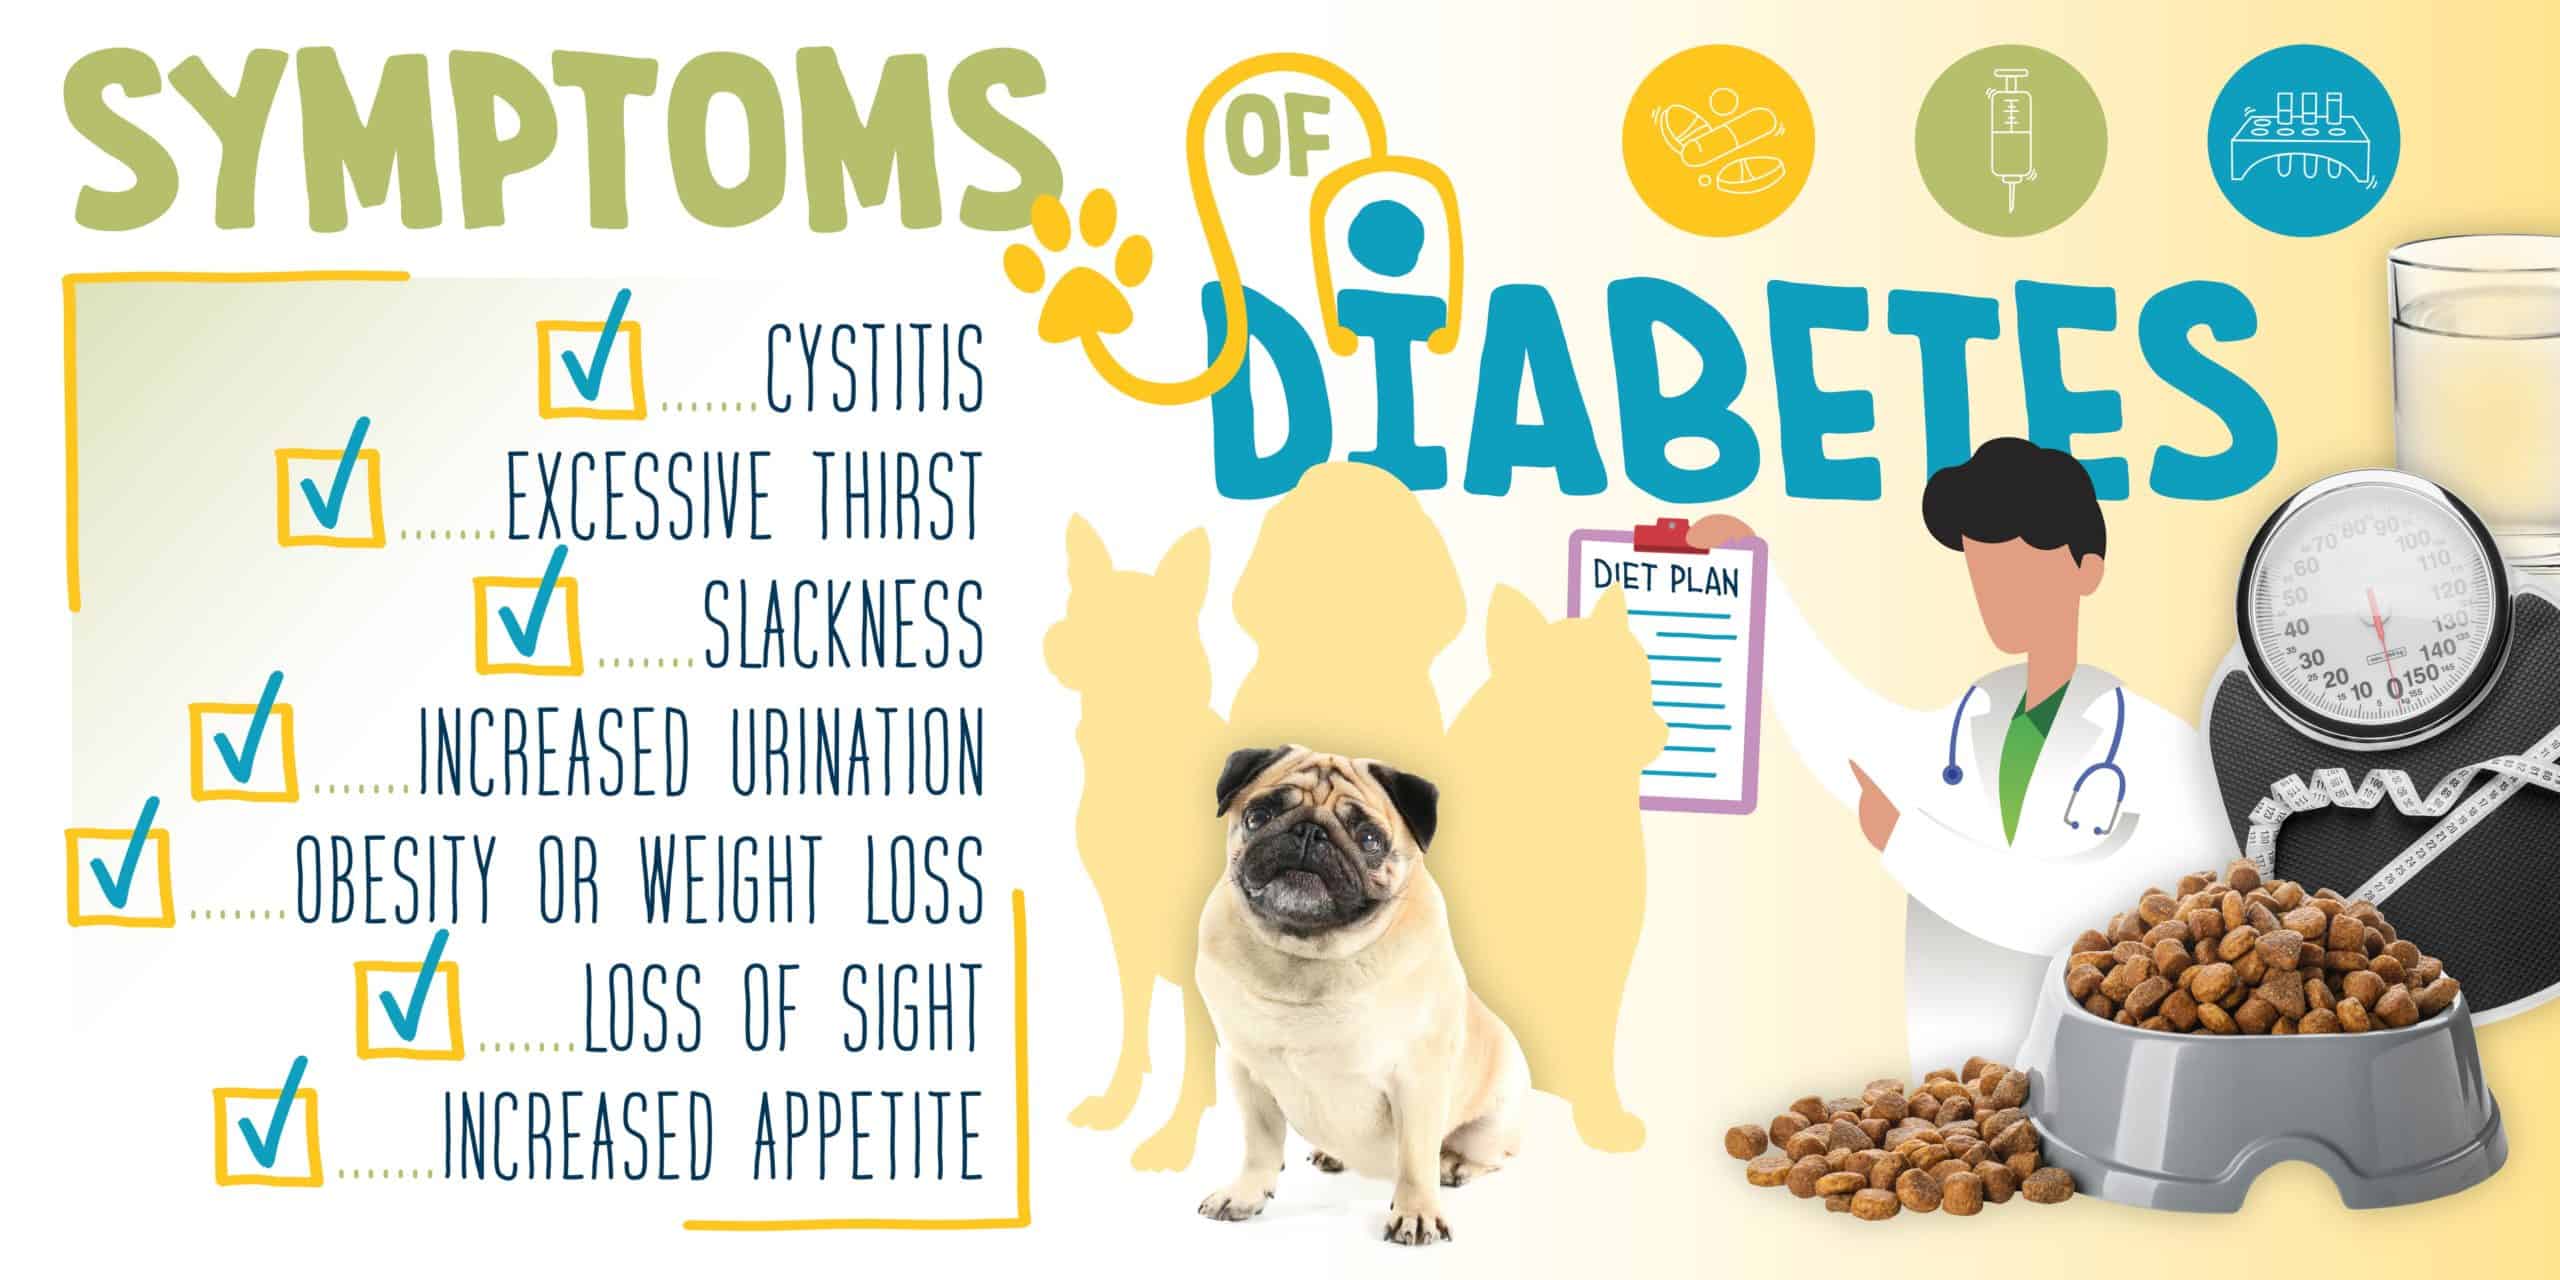 Diabetes mellitus in dogs is caused by impaired insulin secretion of the pancreas, insulin resistance failure, or both.